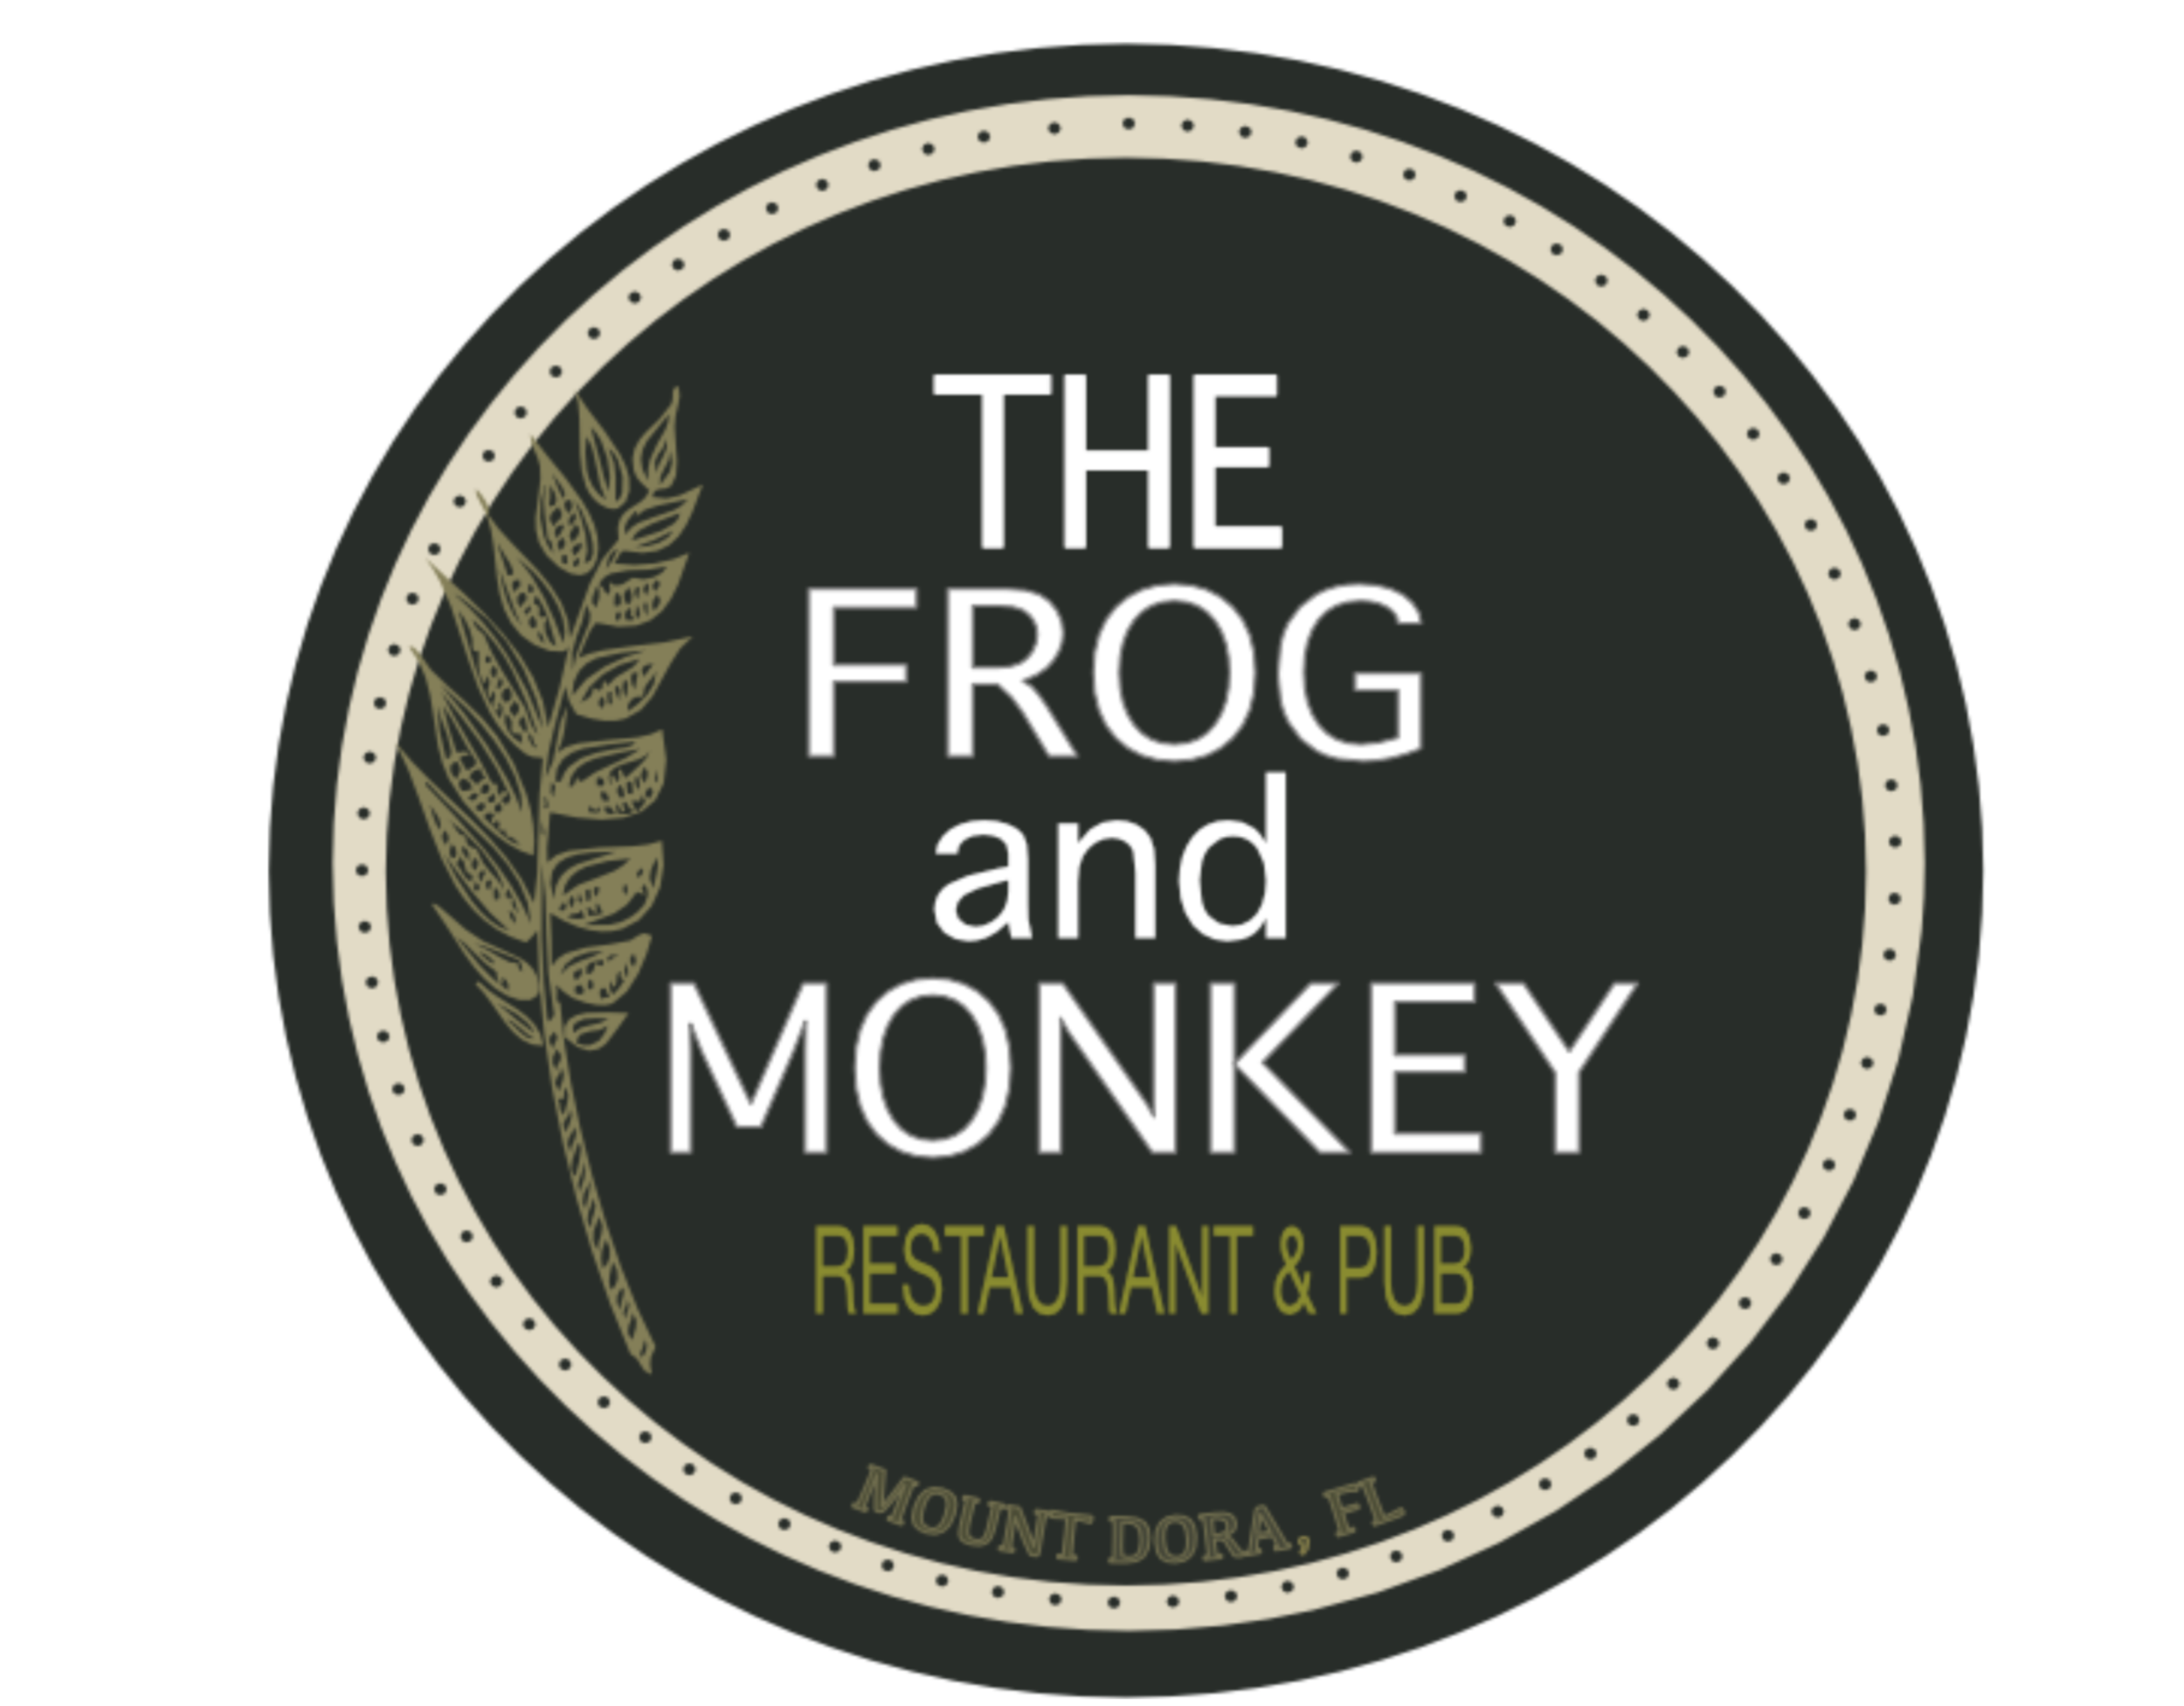 The Frog and Monkey Restaurant & Pub